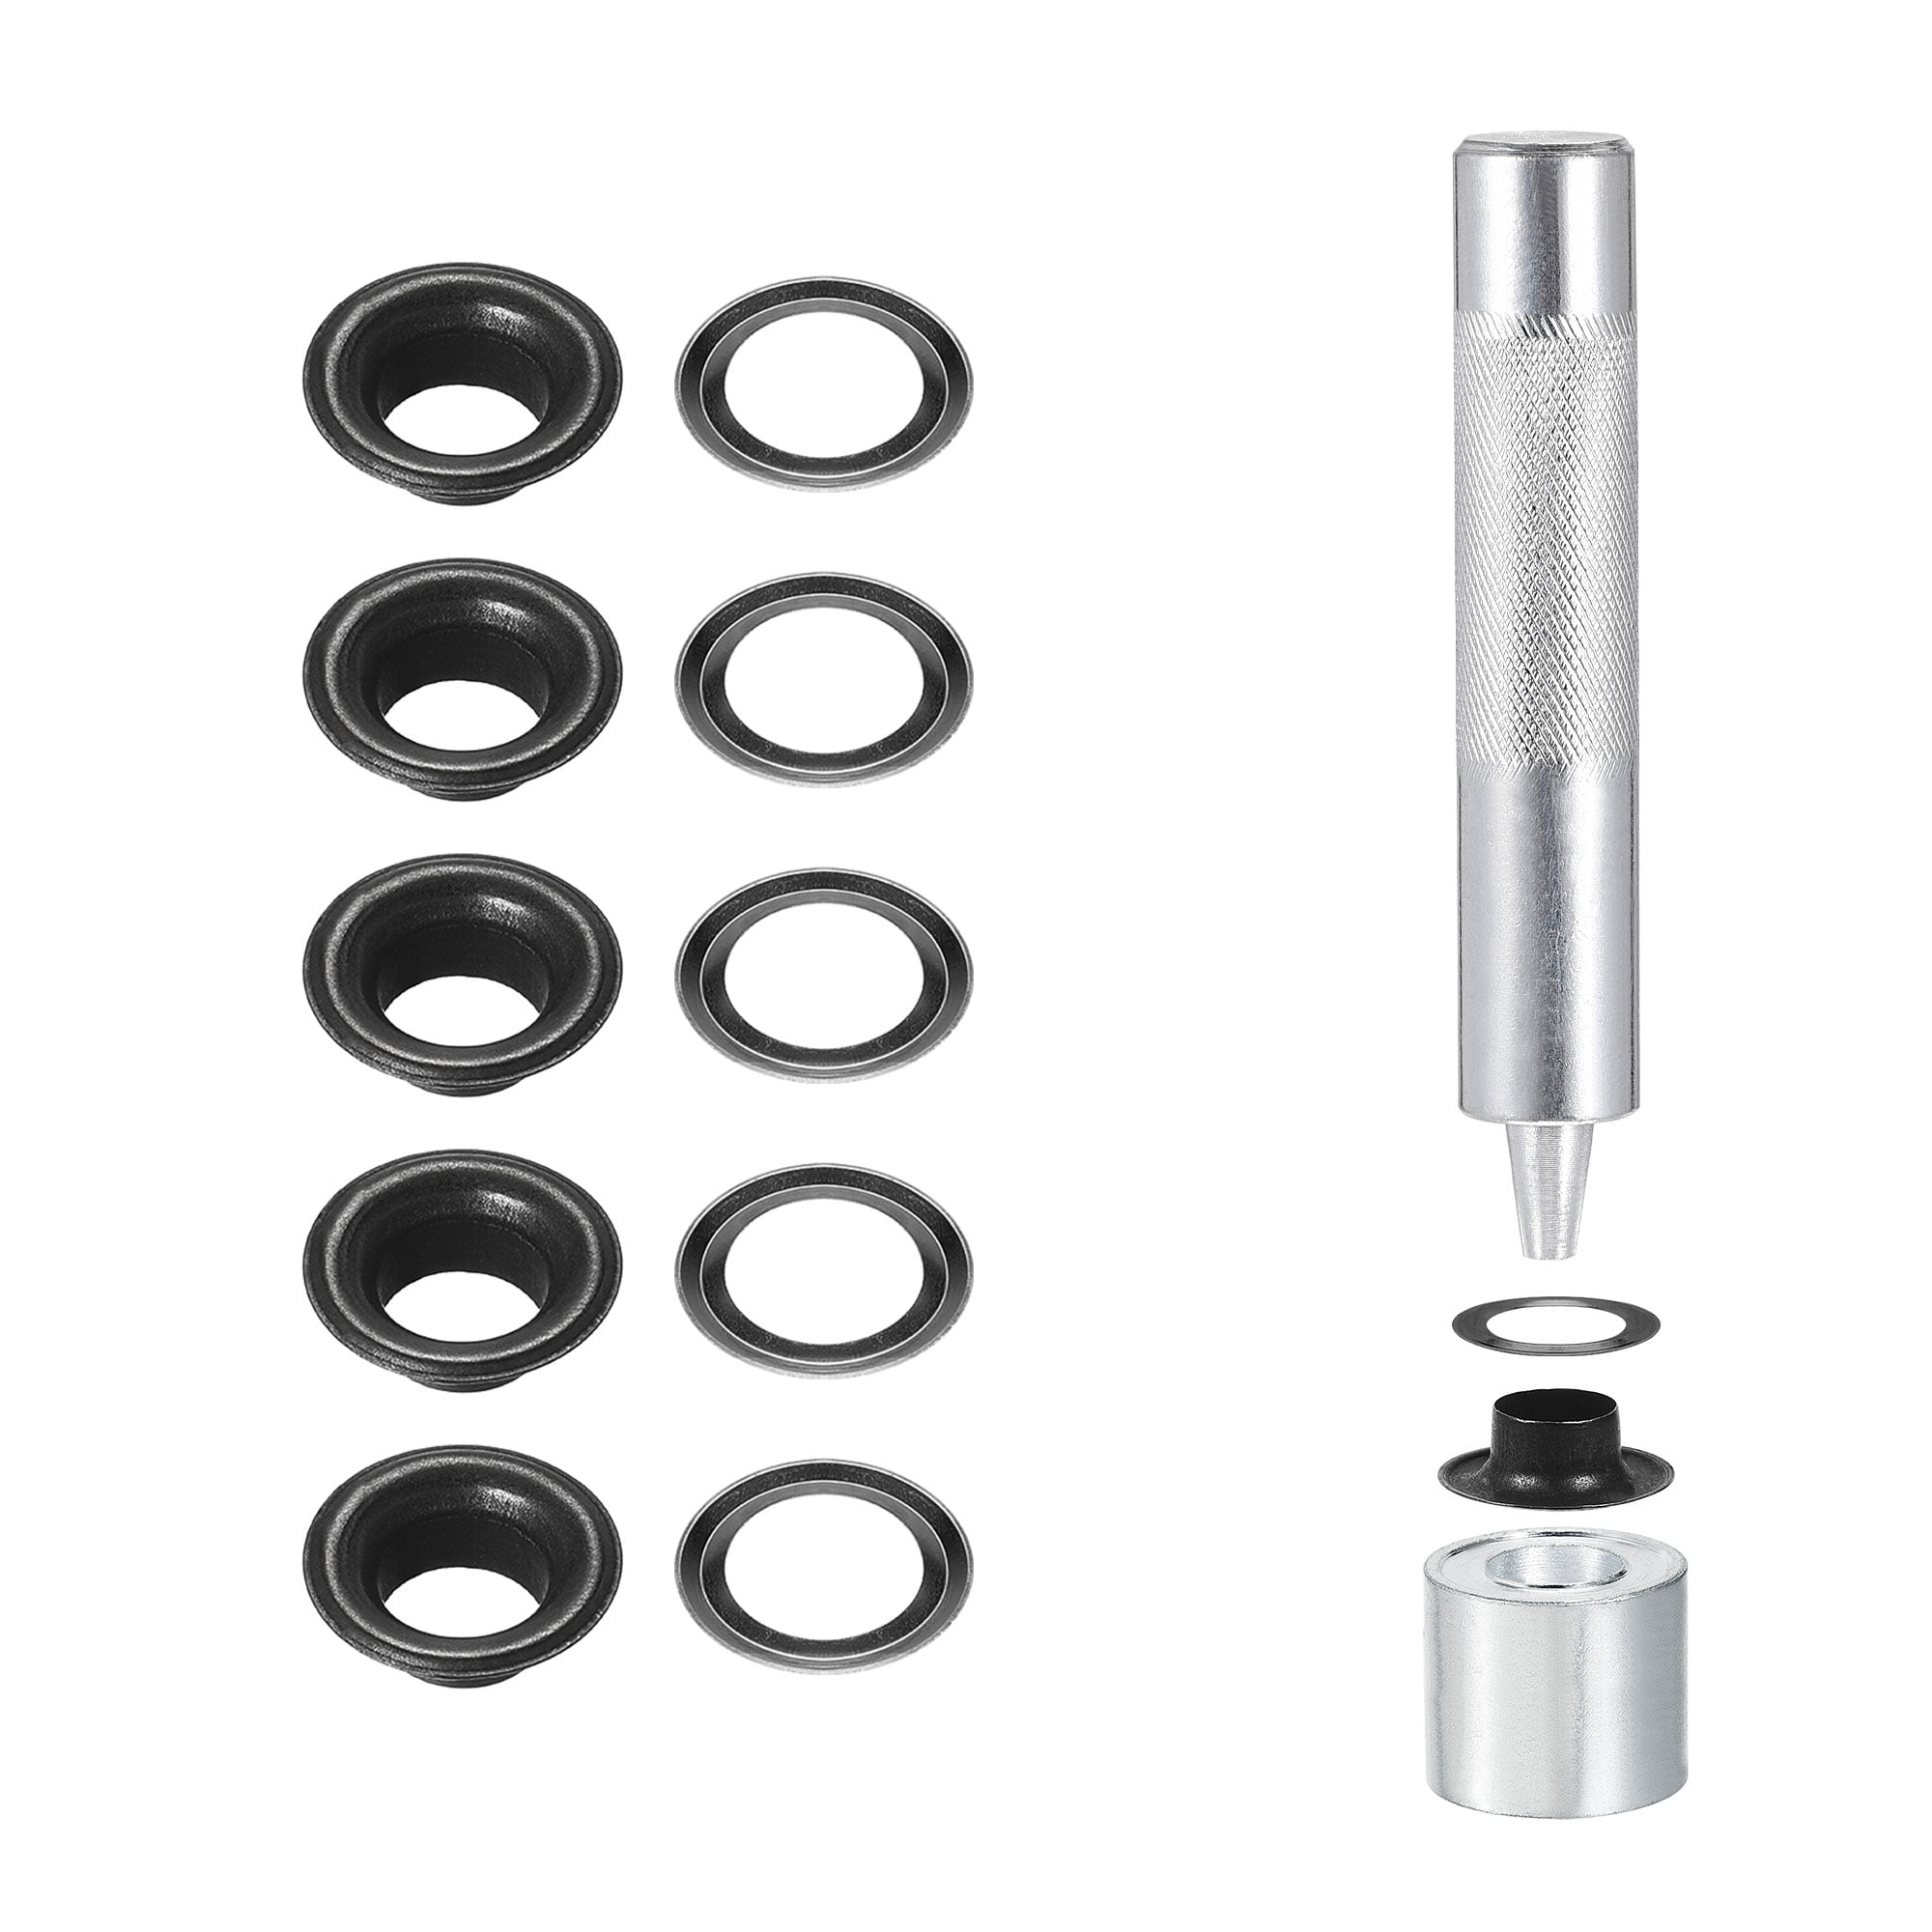 Outbound Metal Grommet Repair & Replacement Kit w/ Tools For